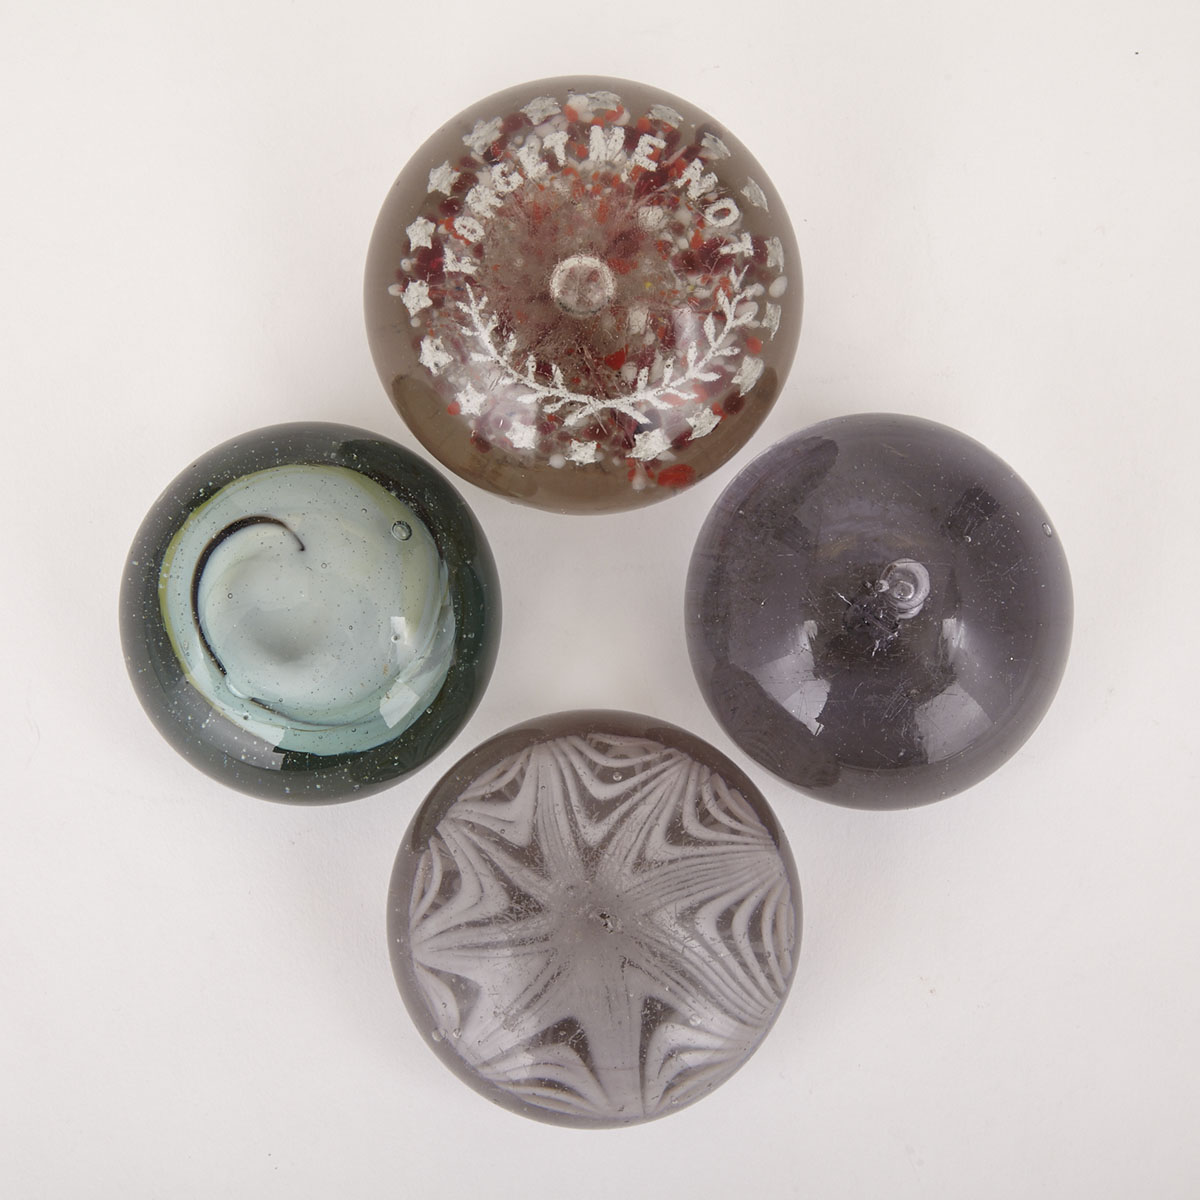 Four Victorian Glass Paperweights/Doorstops, 19th century